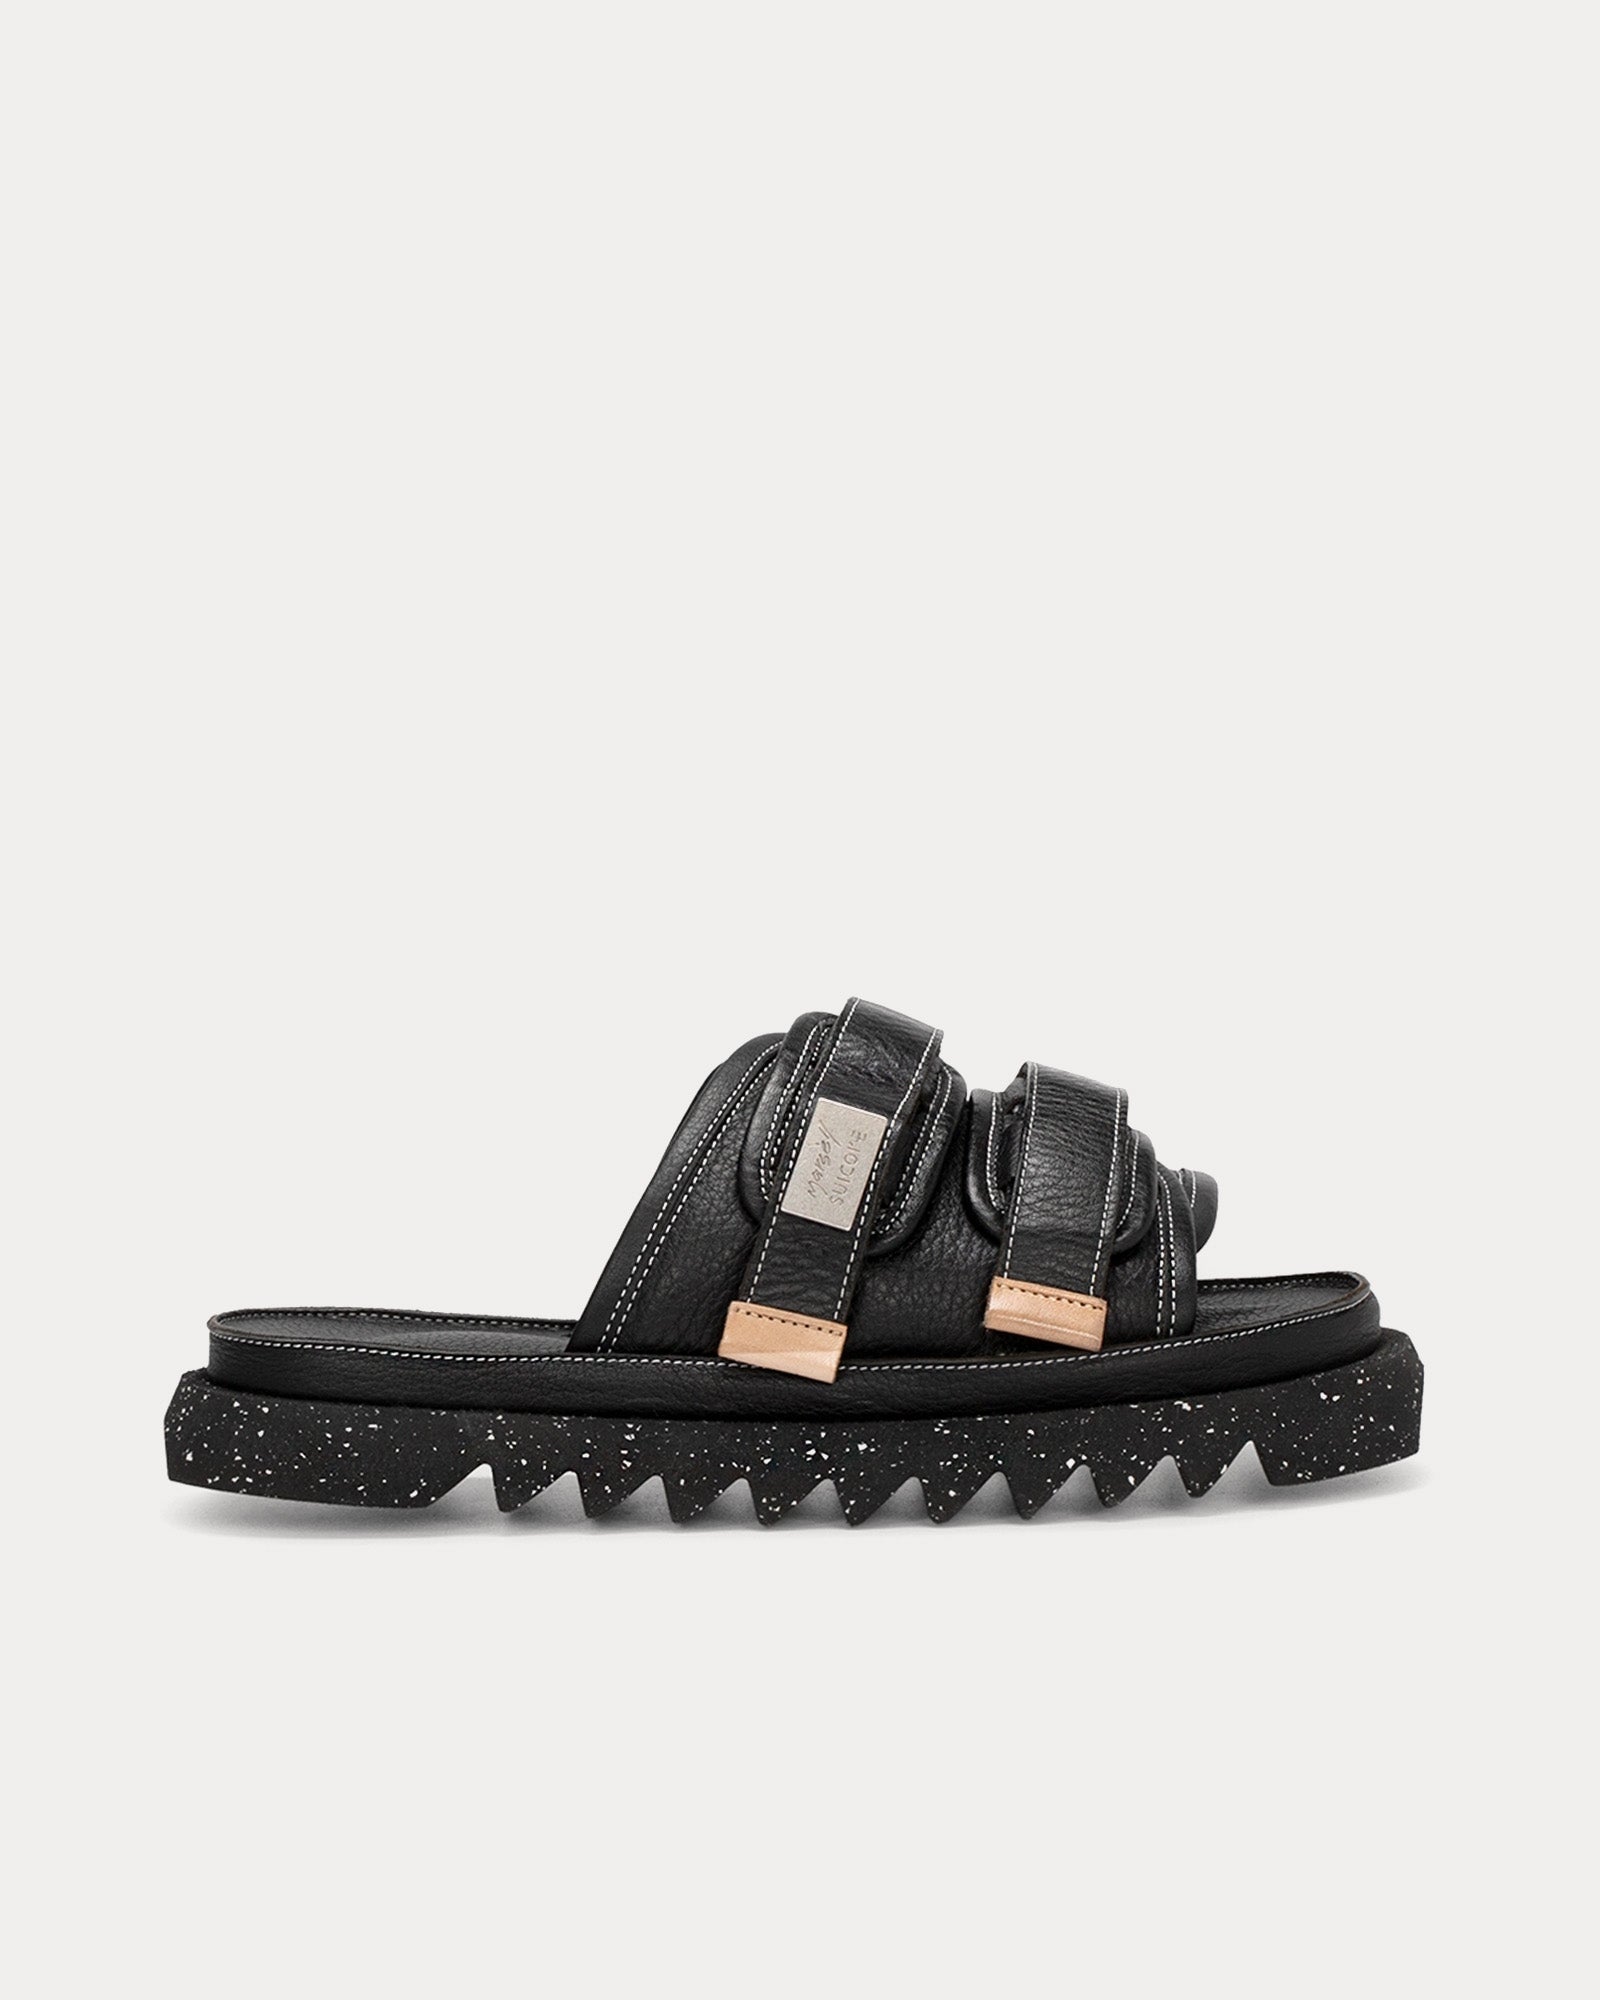 Marsell x Suicoke - Moto Leather Black Sandals